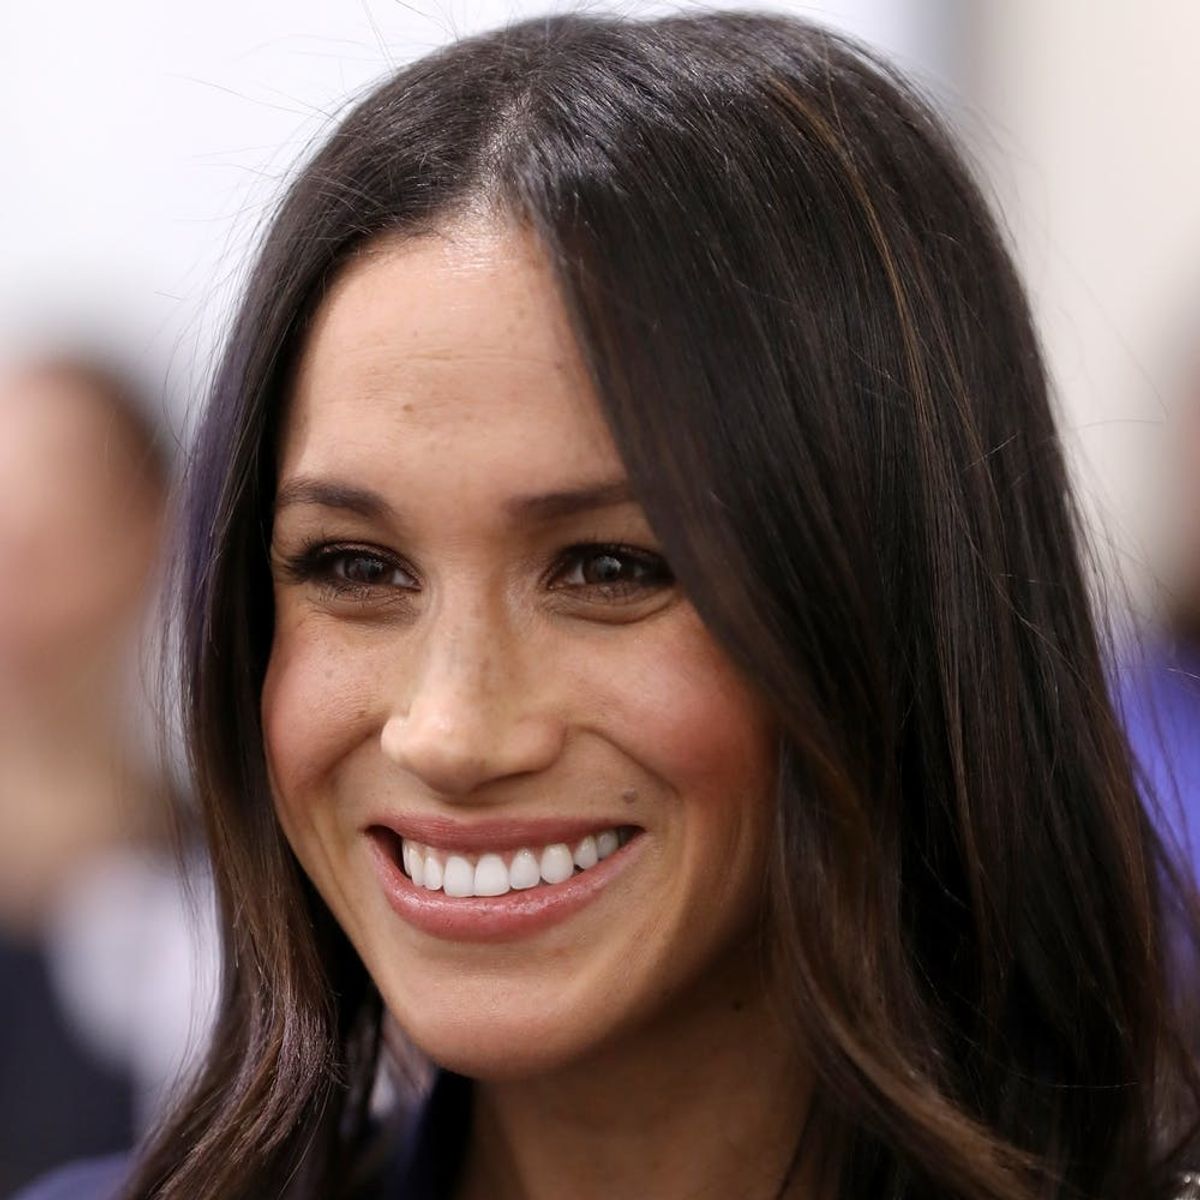 Meghan Markle’s ‘Suits’ Character Will Recycle Her First Wedding Dress for Her Big Day